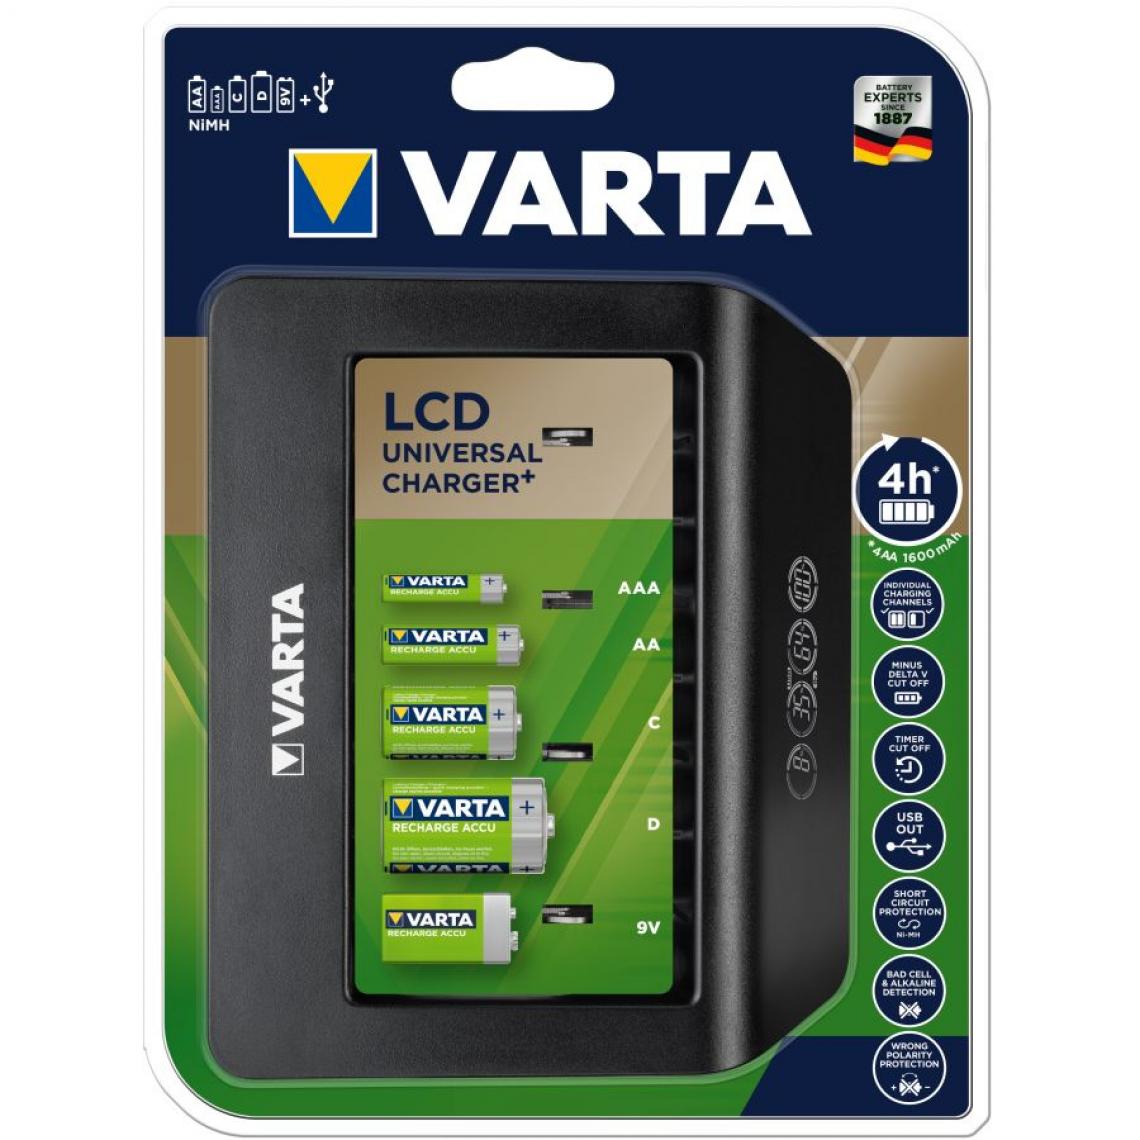 Varta - Chargeur VARTA LCD Universel - 57688101401 - Piles rechargeables